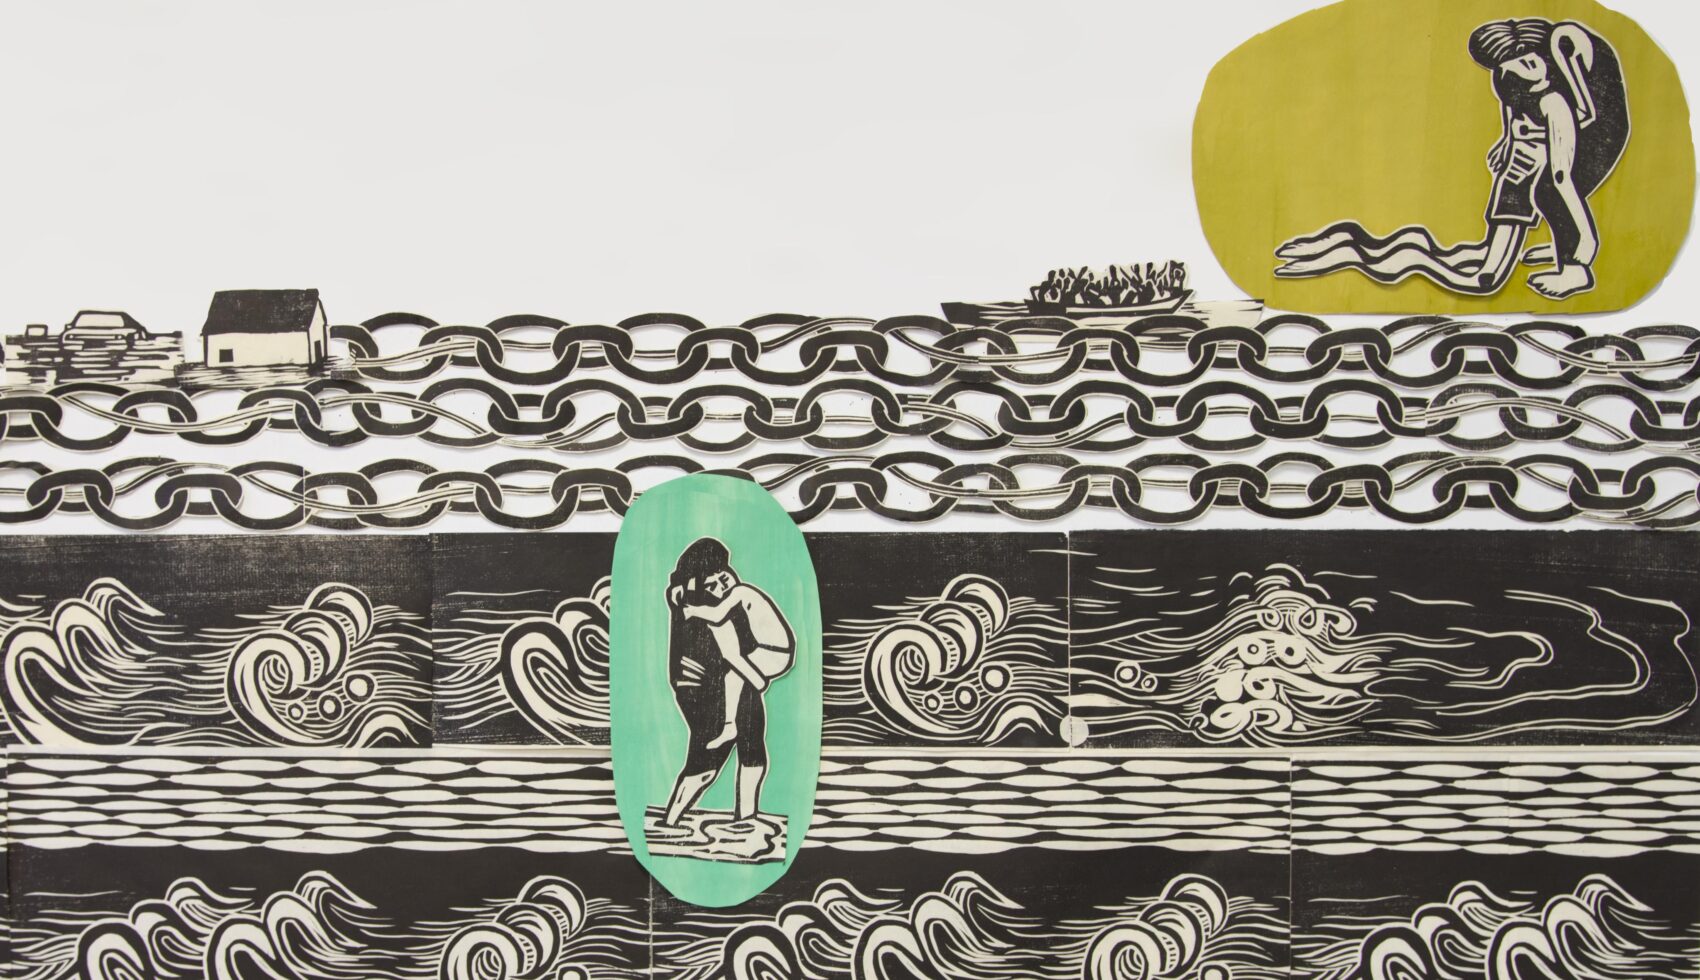 a detail of the work Sea Crossing. 2 rows of waves over a black space; 3 rows of chains, a woman carrying a child wades through water; small crowded boats, a floating house, a floating car, another woman holds a drowning victim.